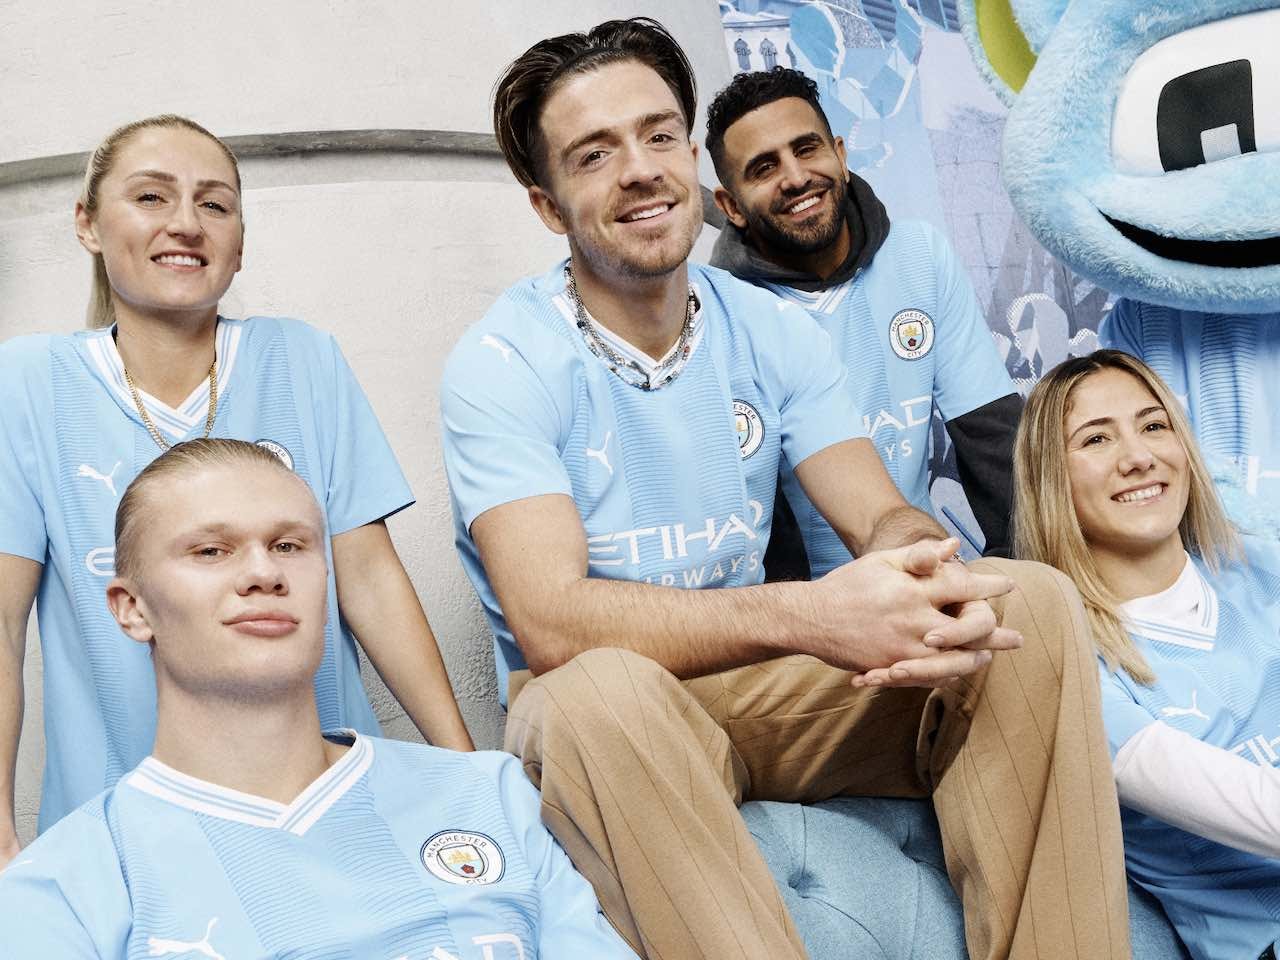 Pictured: Erling Braut Haaland, Jack Grealish model Manchester City 2023-24 home kit